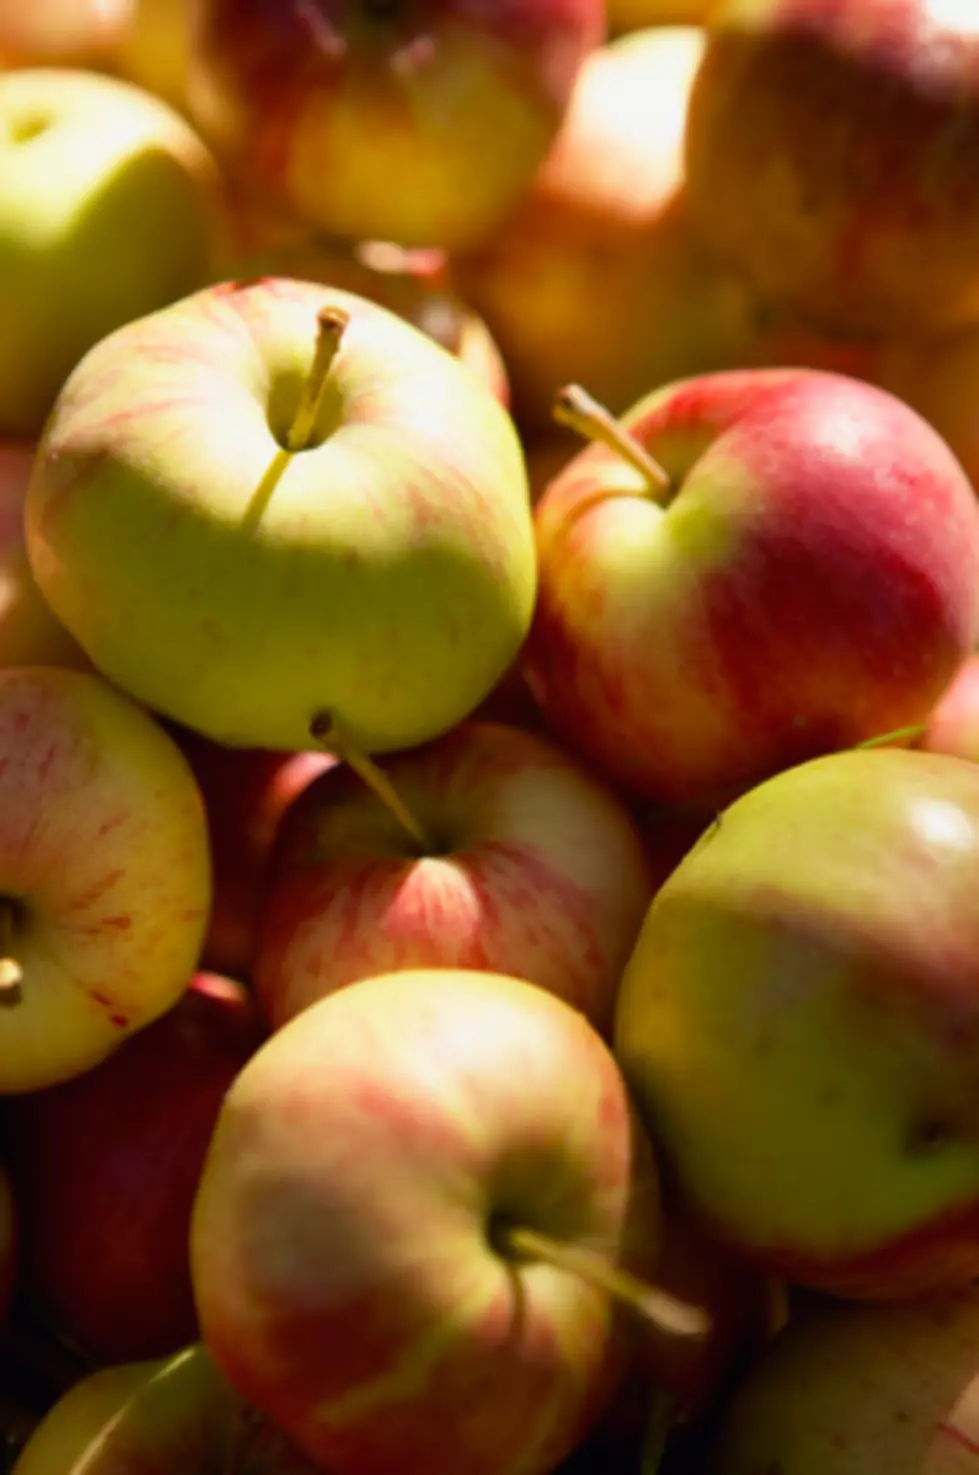 Where Is The Best Apple Picking in the Capital Region? [RESULTS]